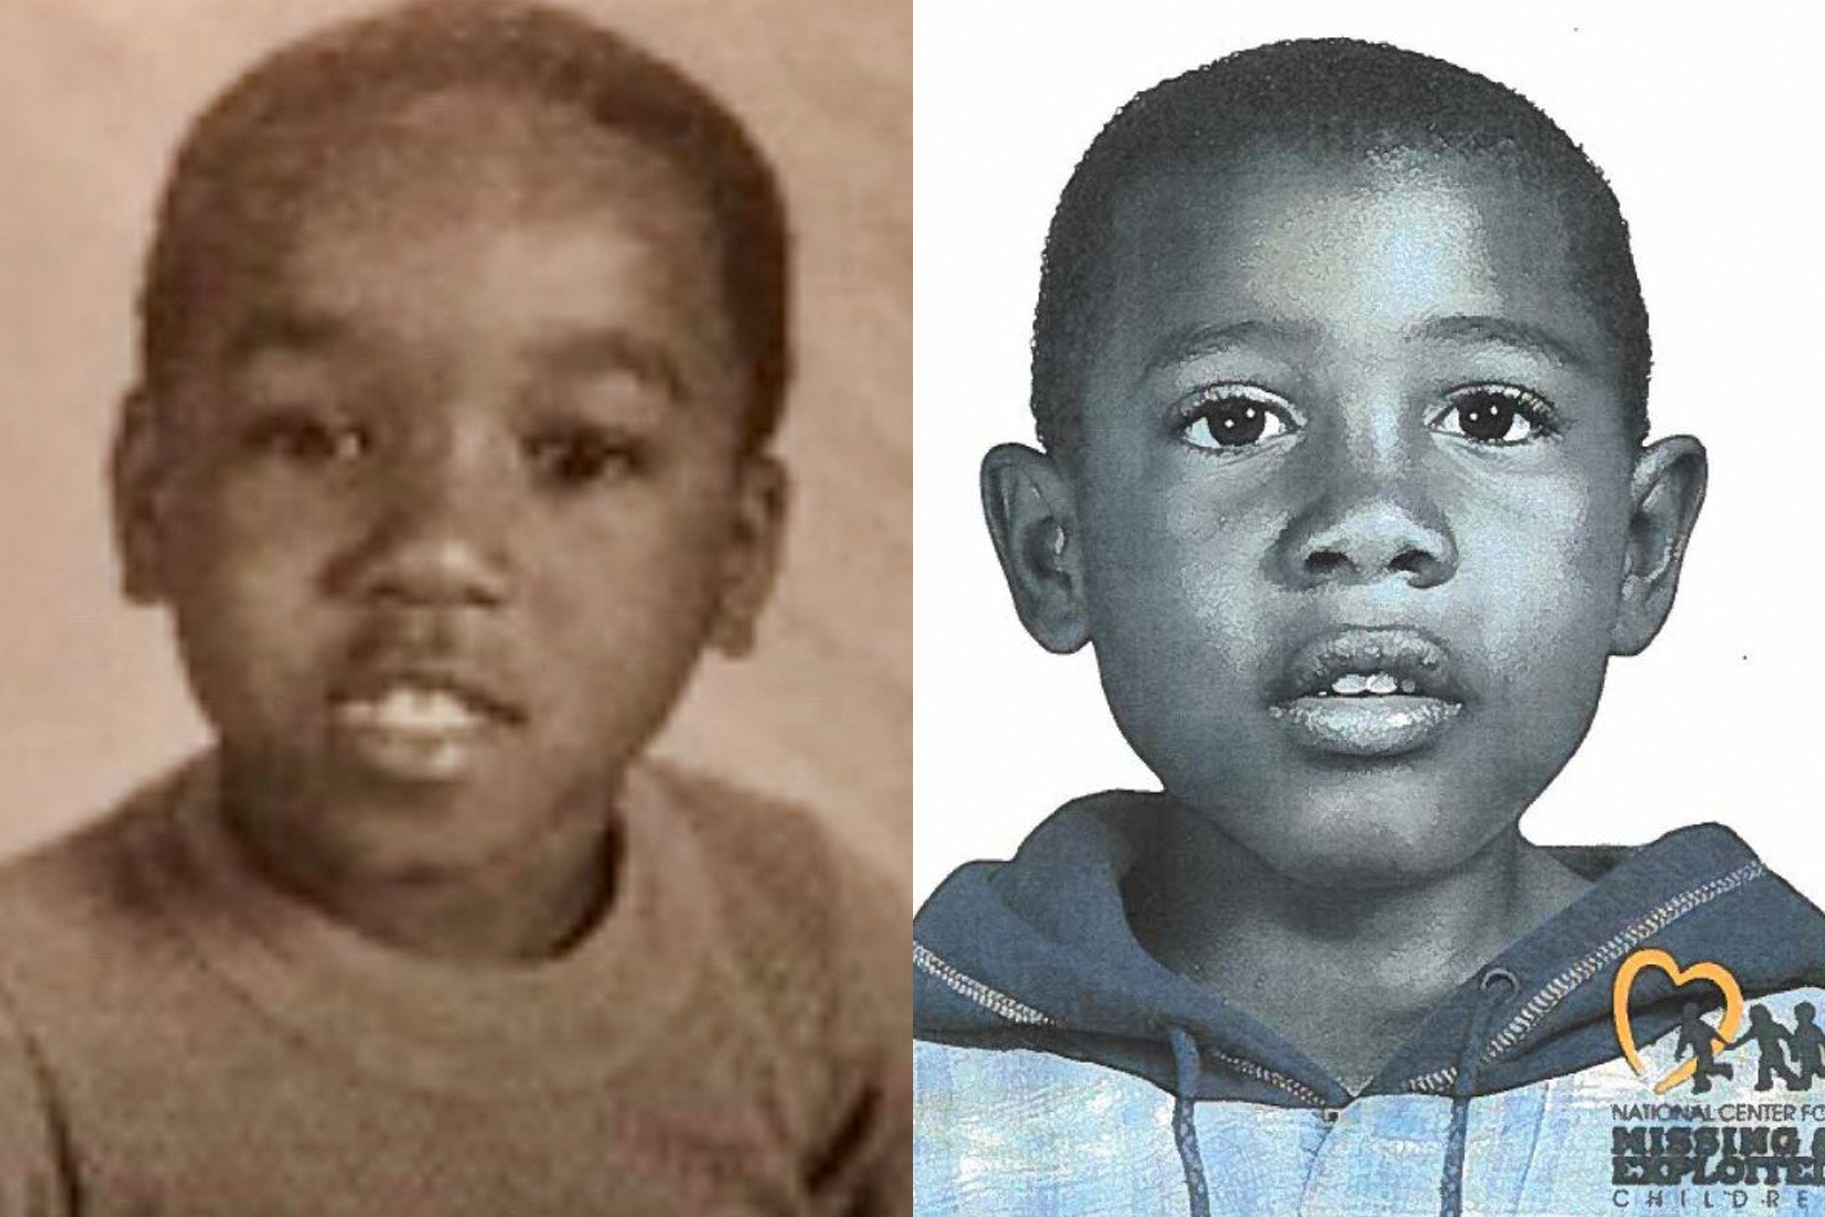 A side by side photo of William Deshawn Hamilton as a young boy next to a recreation image